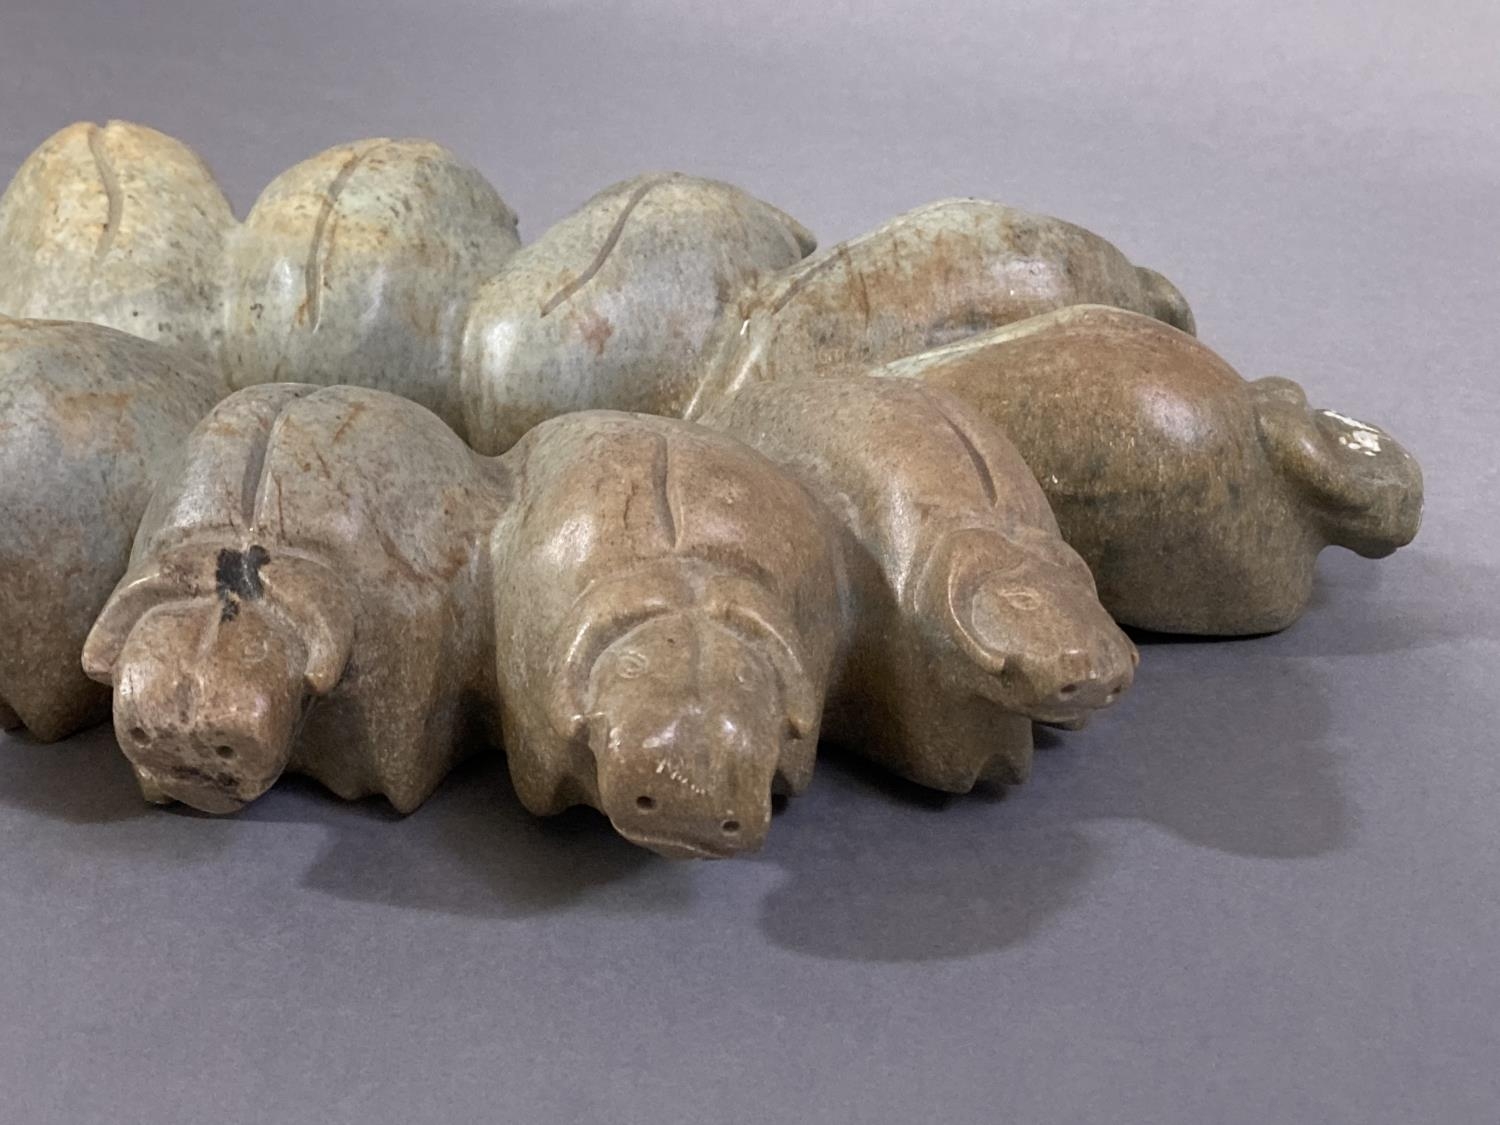 Inuit Carving - Musk Ox Circle by Johanasie Faber 2002, rare carving of twelve musk oxen in the - Image 9 of 11